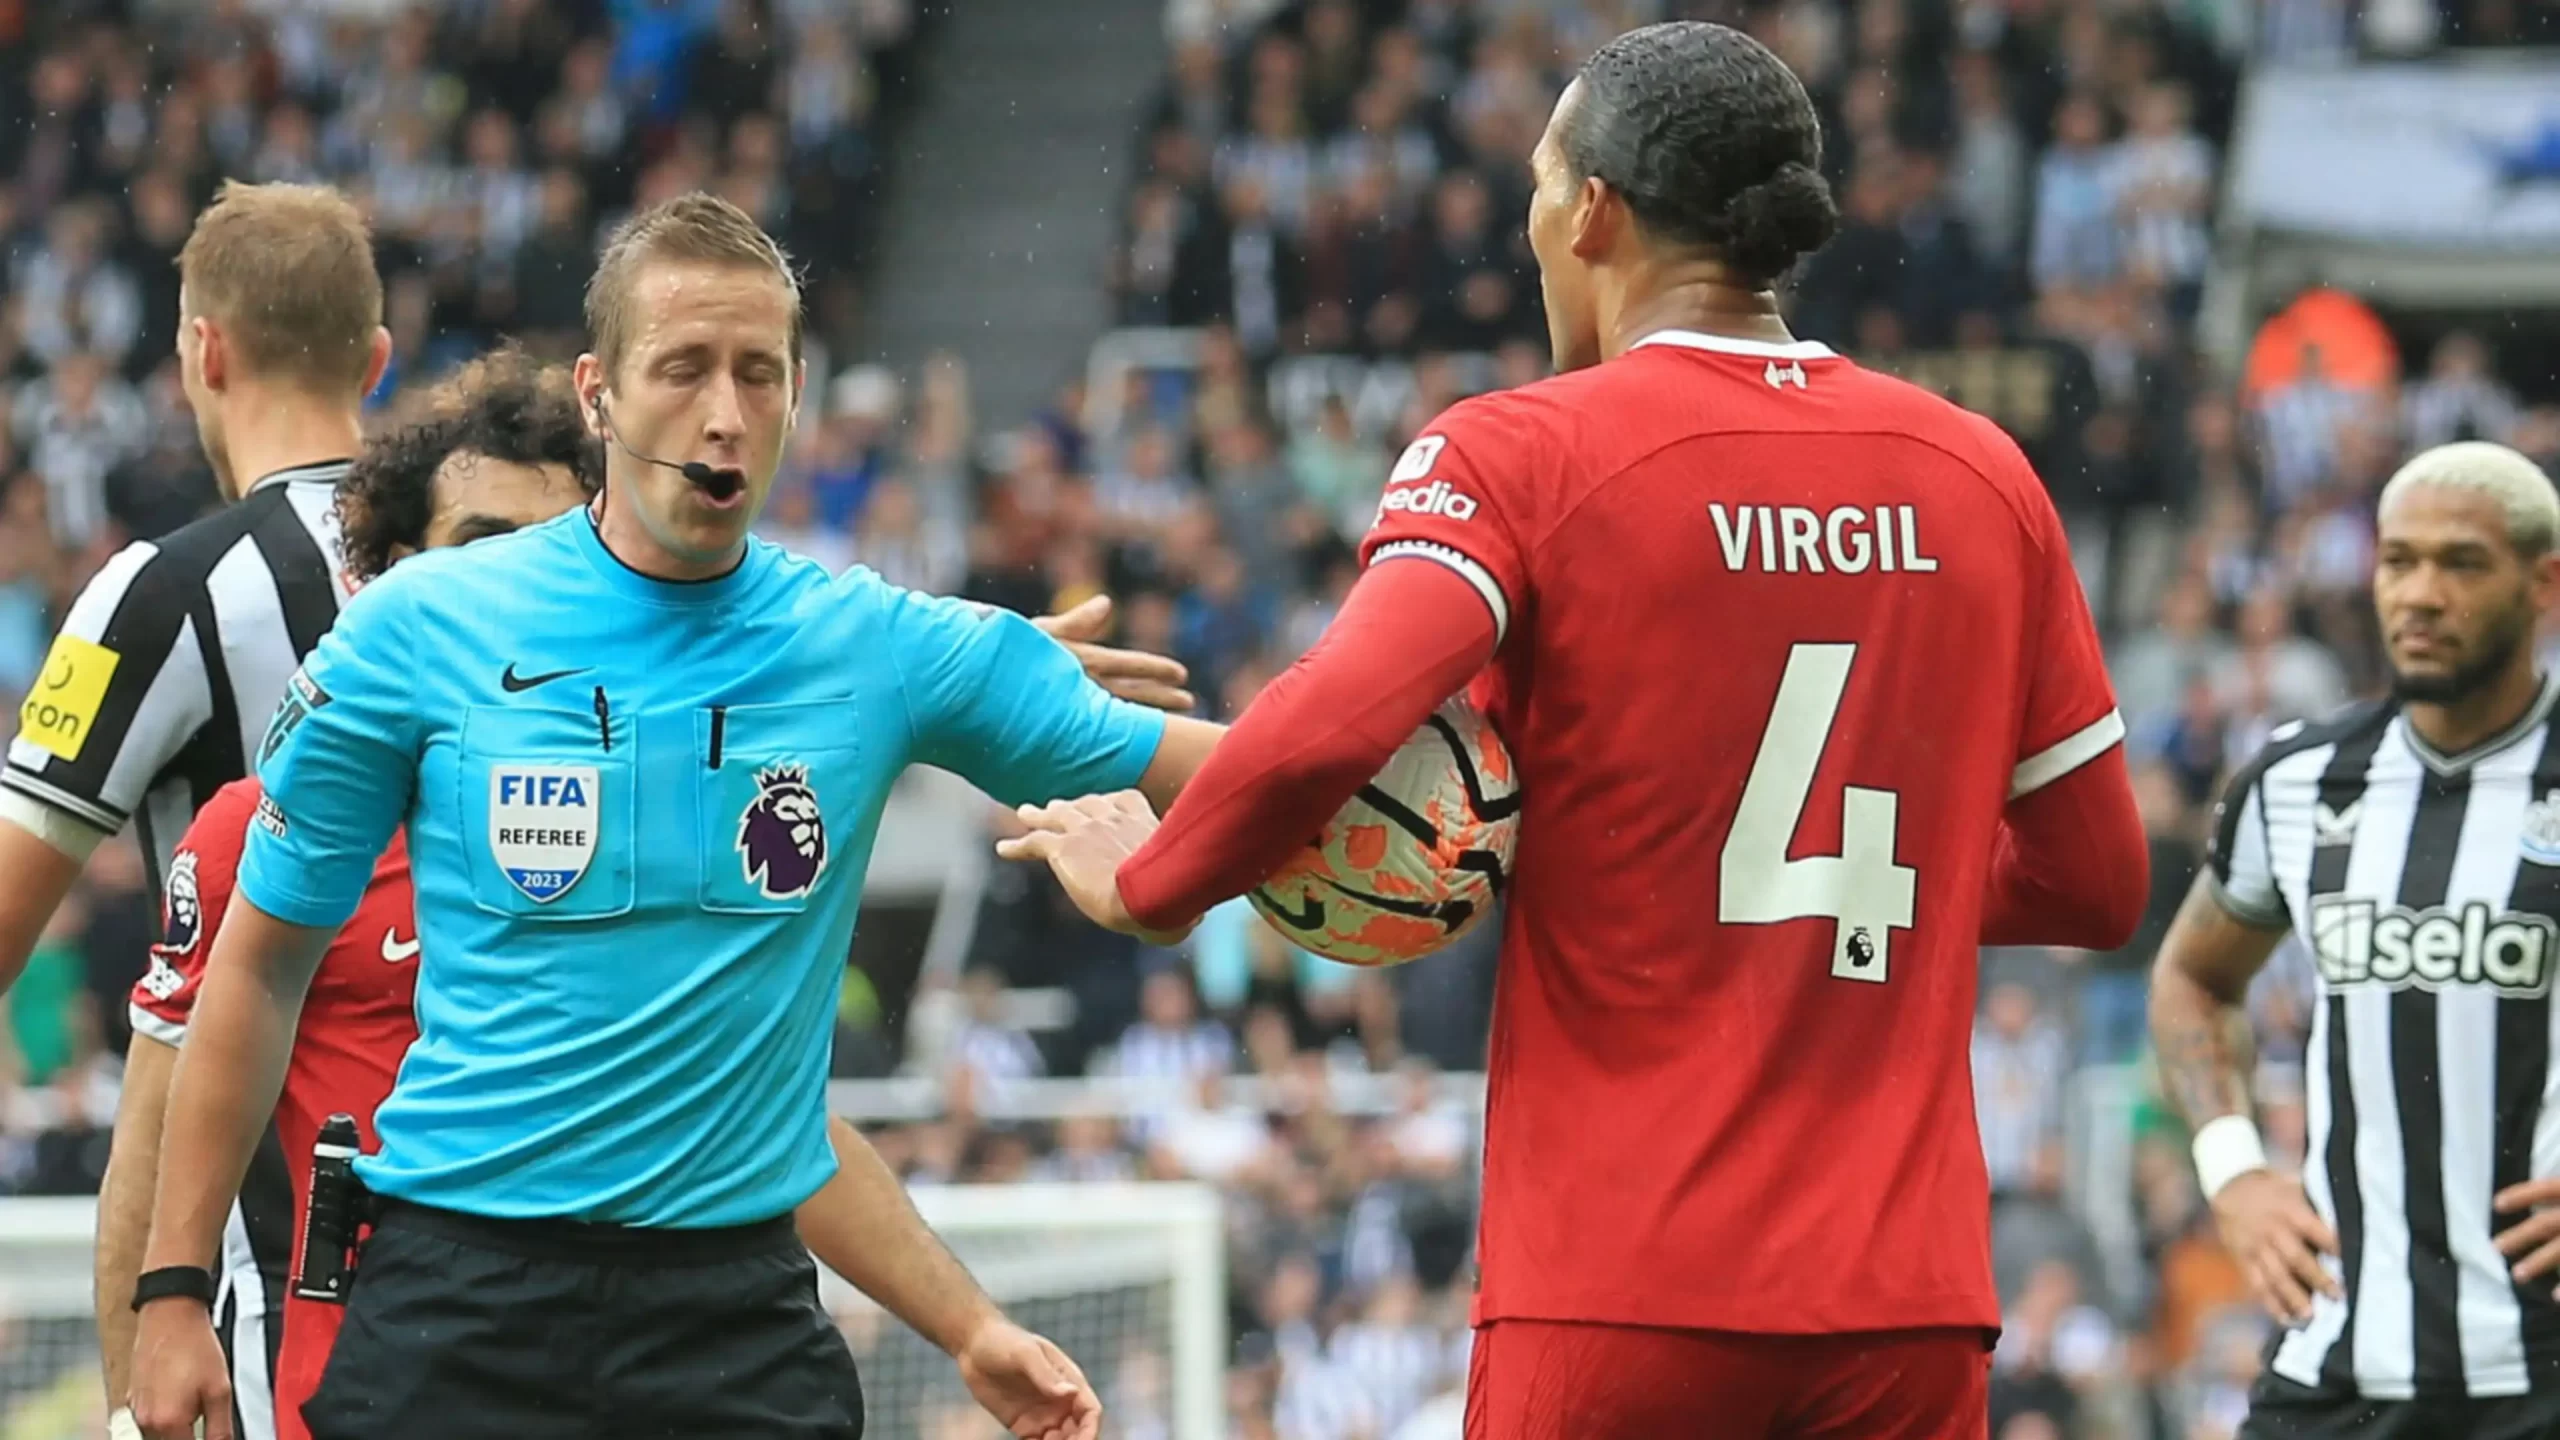 Liverpool captain could be facing more troubles after Red Card